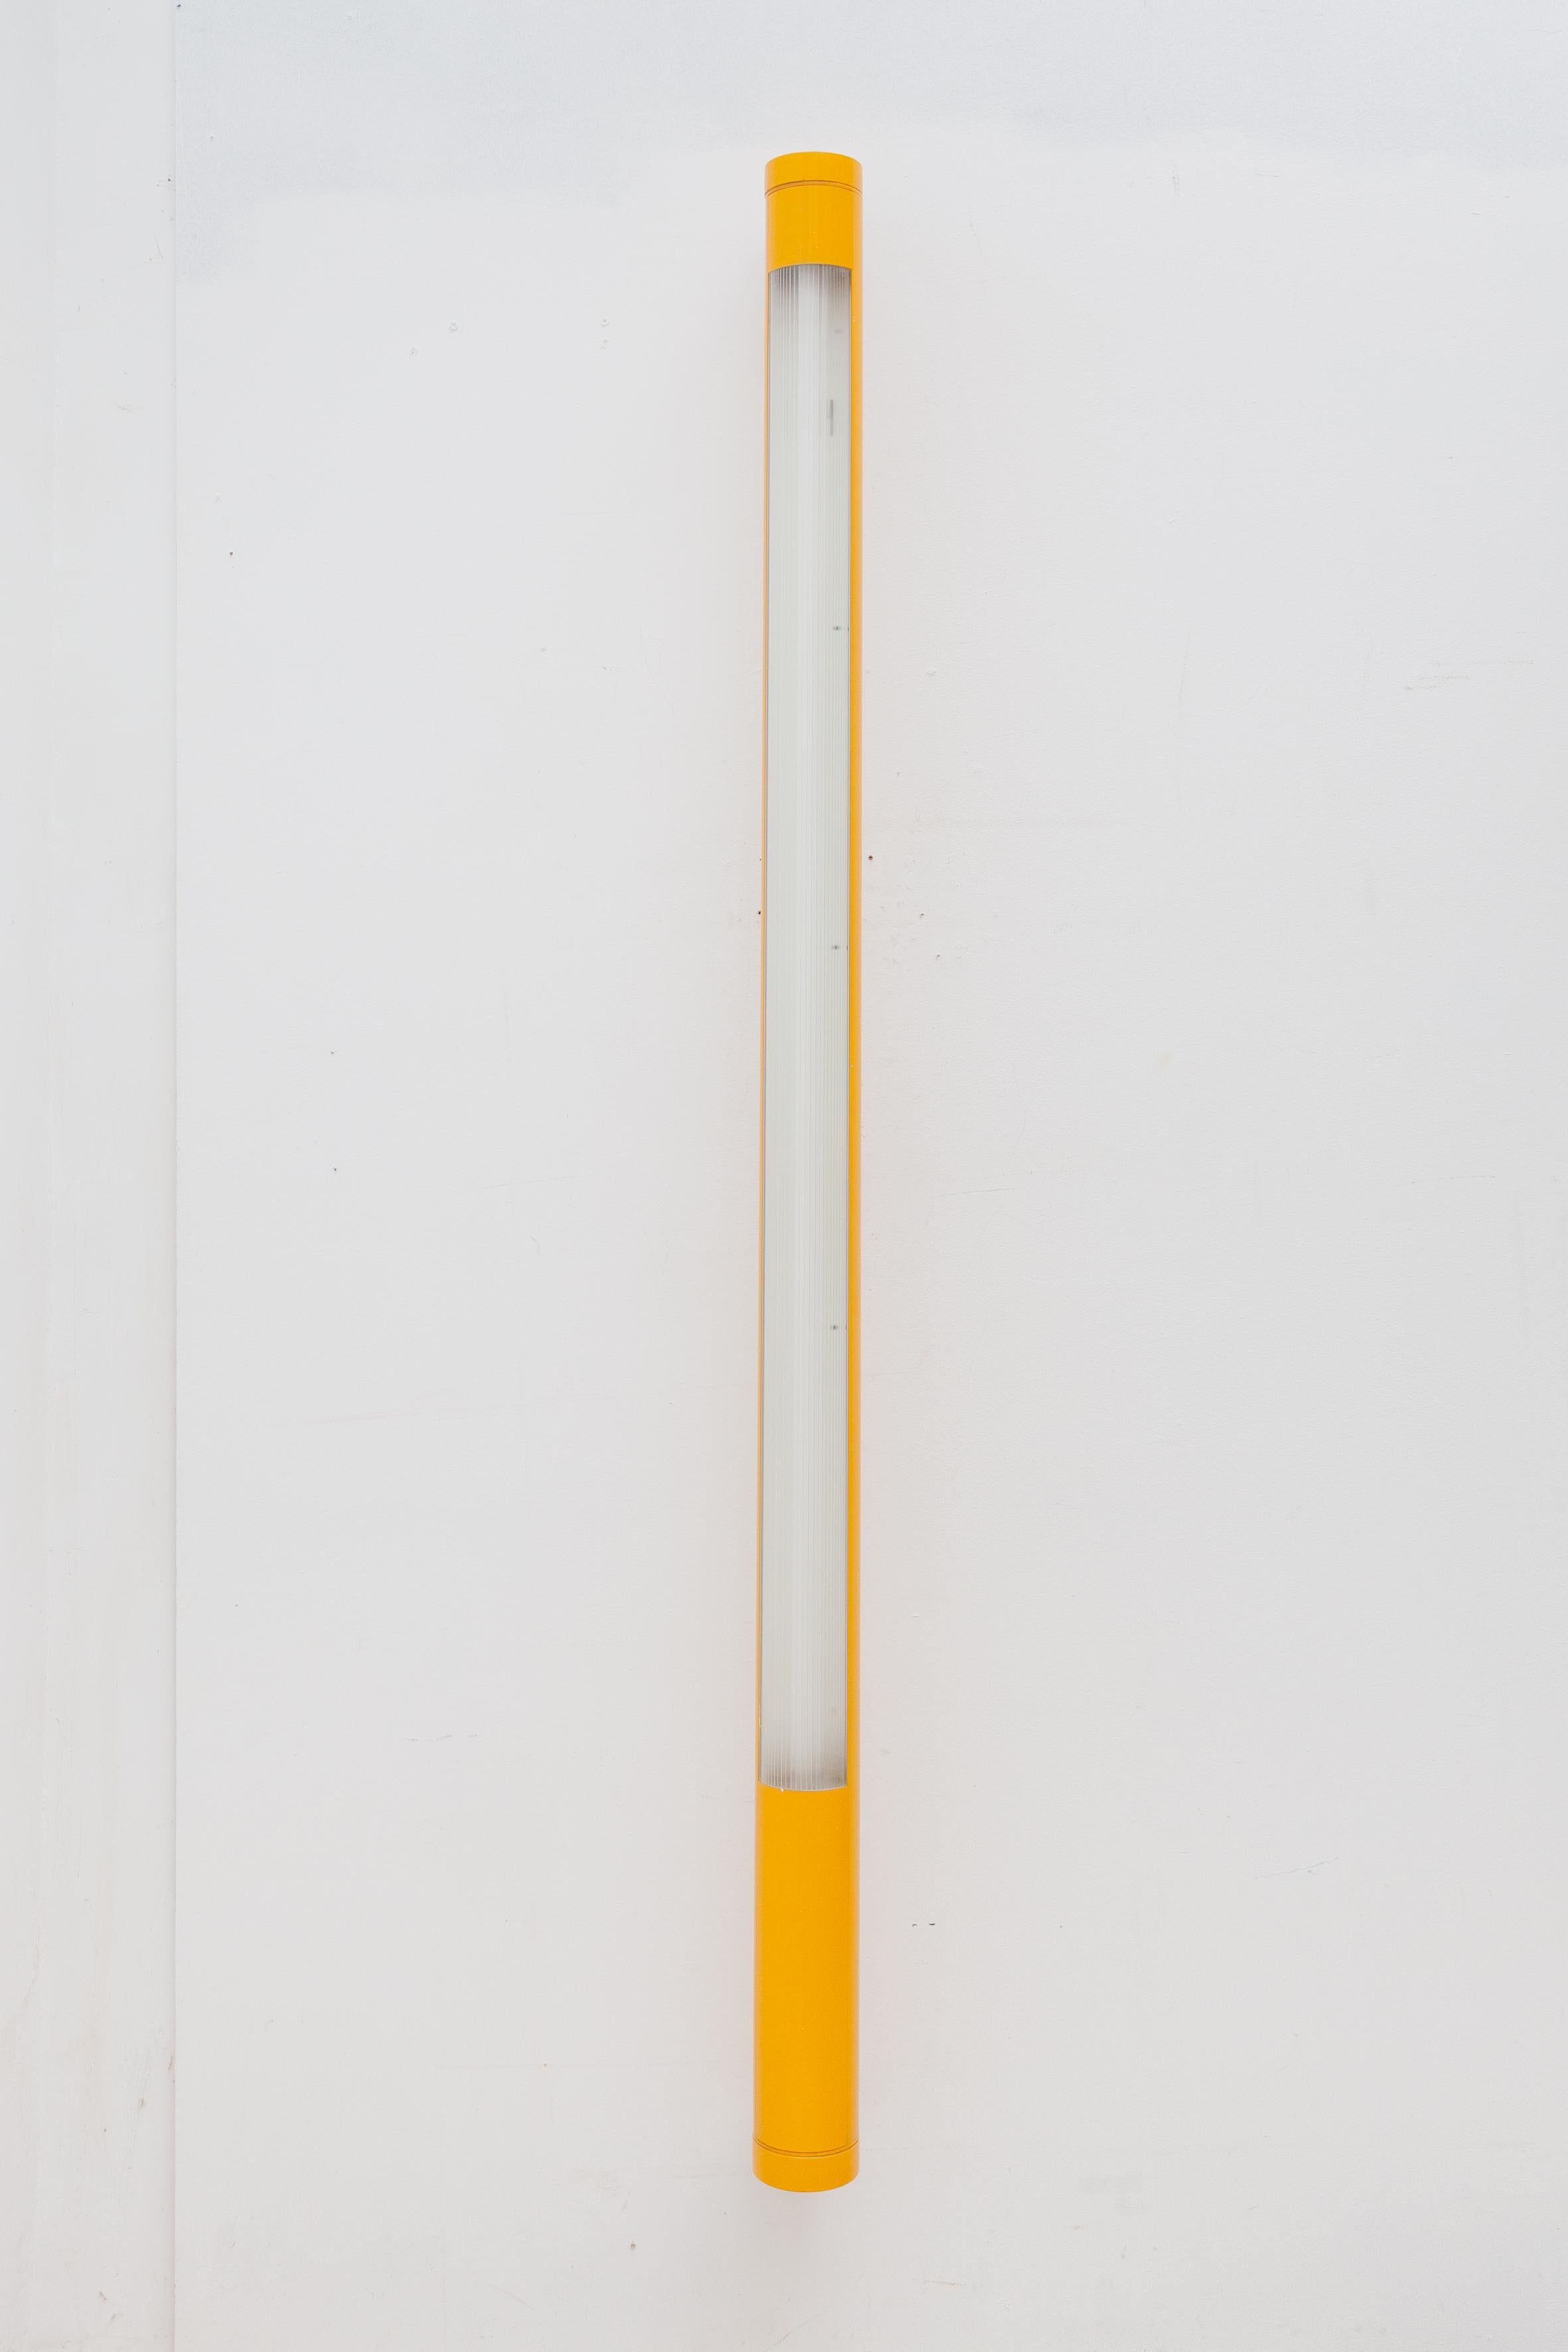 Late 20th Century Yellow Metal and Fluorescent Tube Wall Lamp, 1970s, Germany For Sale